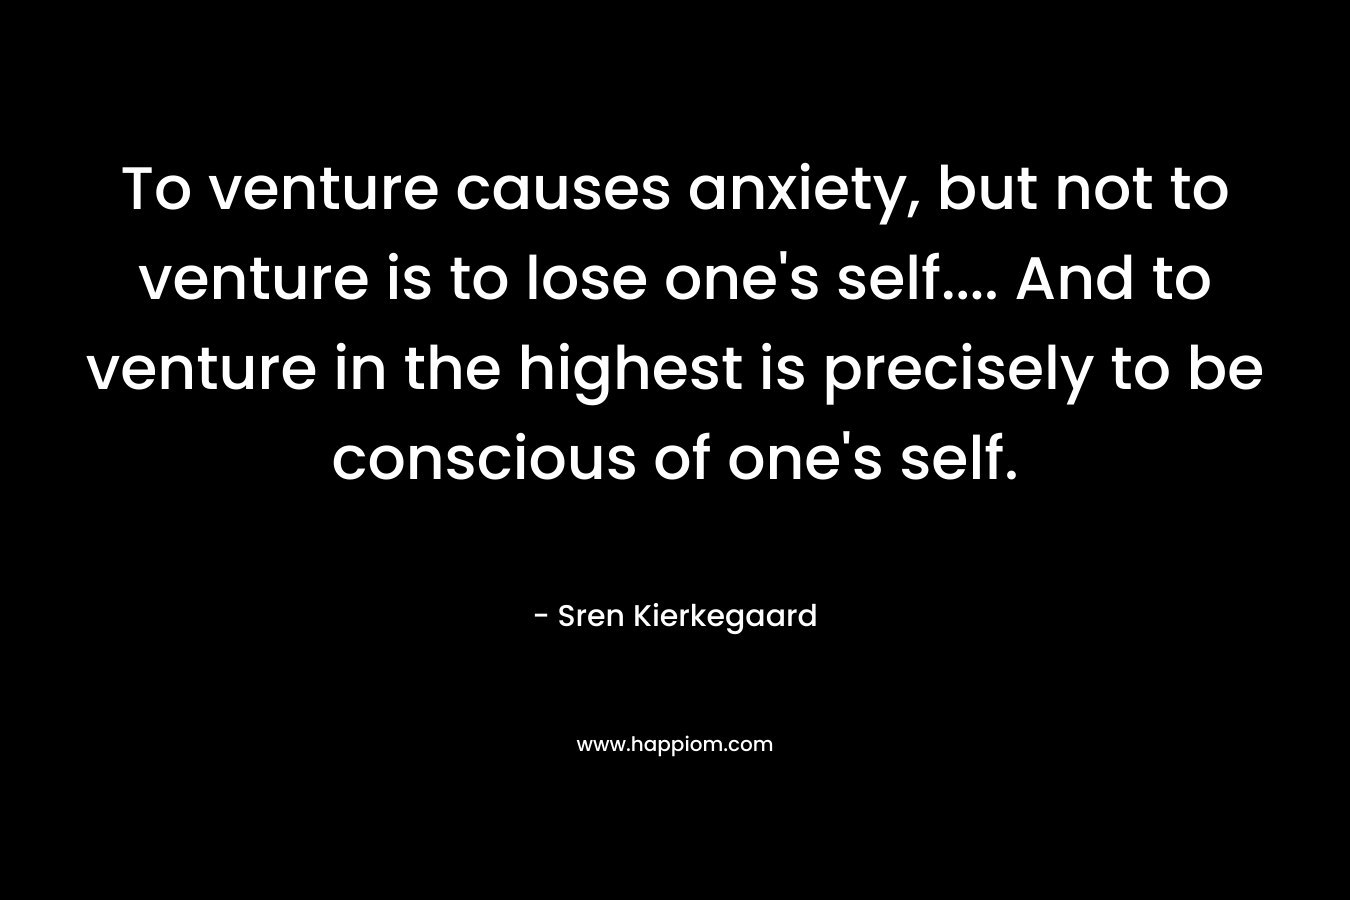 To venture causes anxiety, but not to venture is to lose one’s self…. And to venture in the highest is precisely to be conscious of one’s self. – Sren Kierkegaard